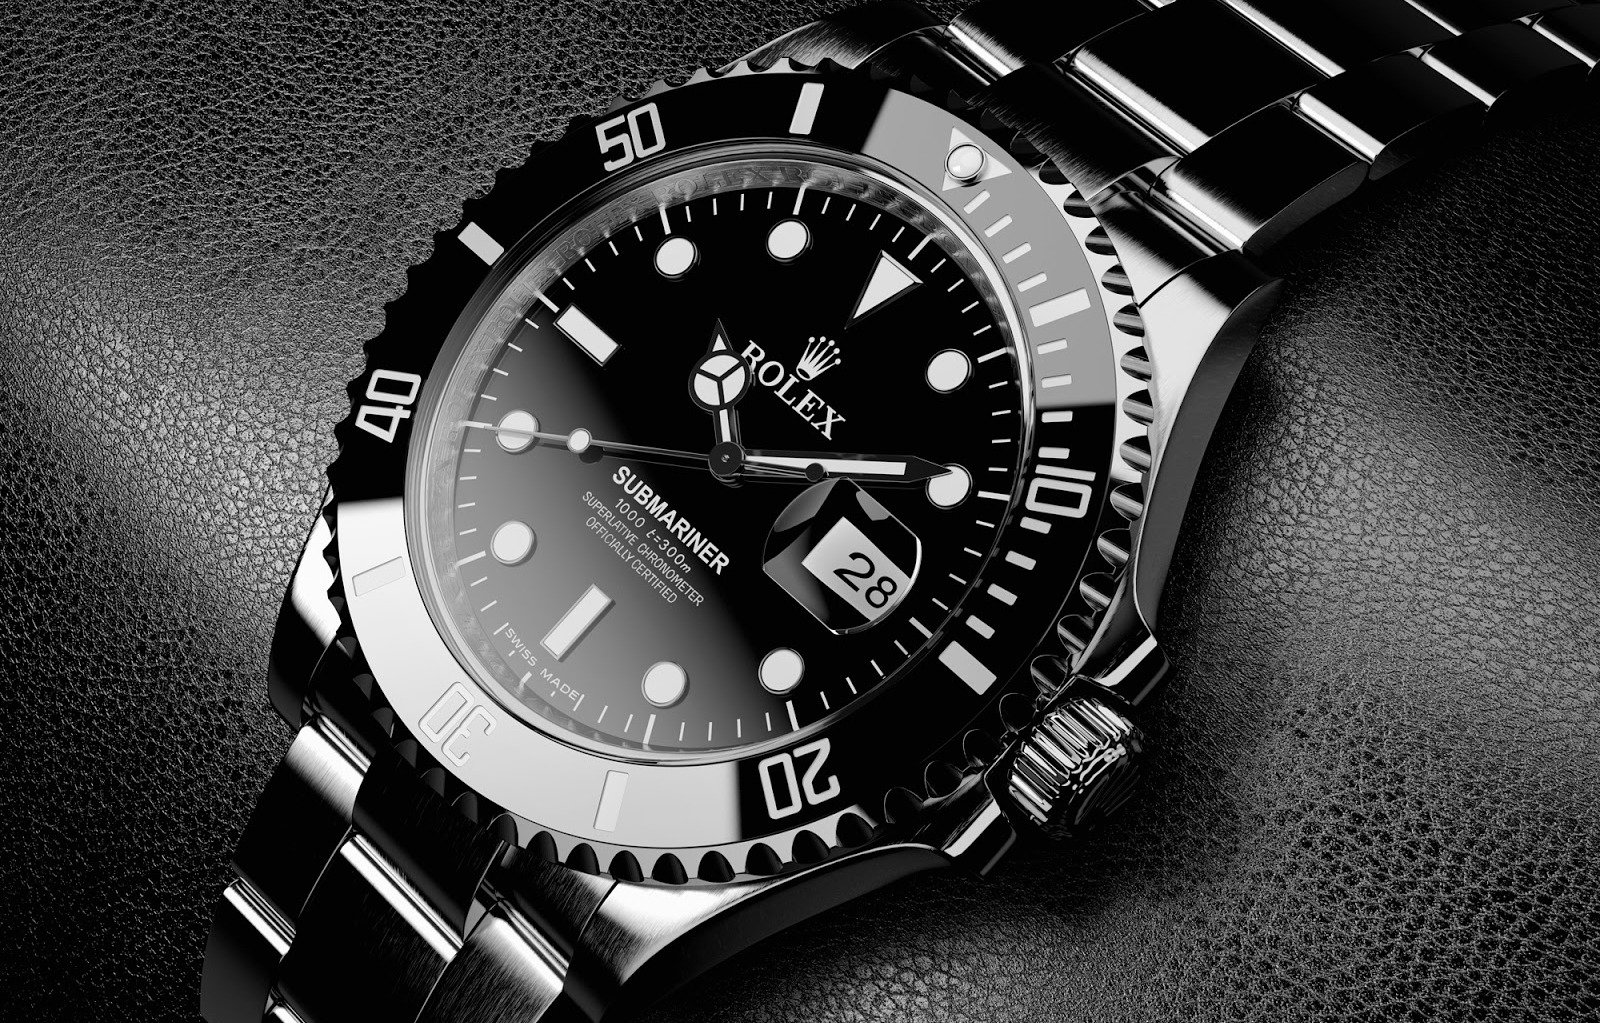 11 Iconic Characteristics Your Wristwatch Should Have!